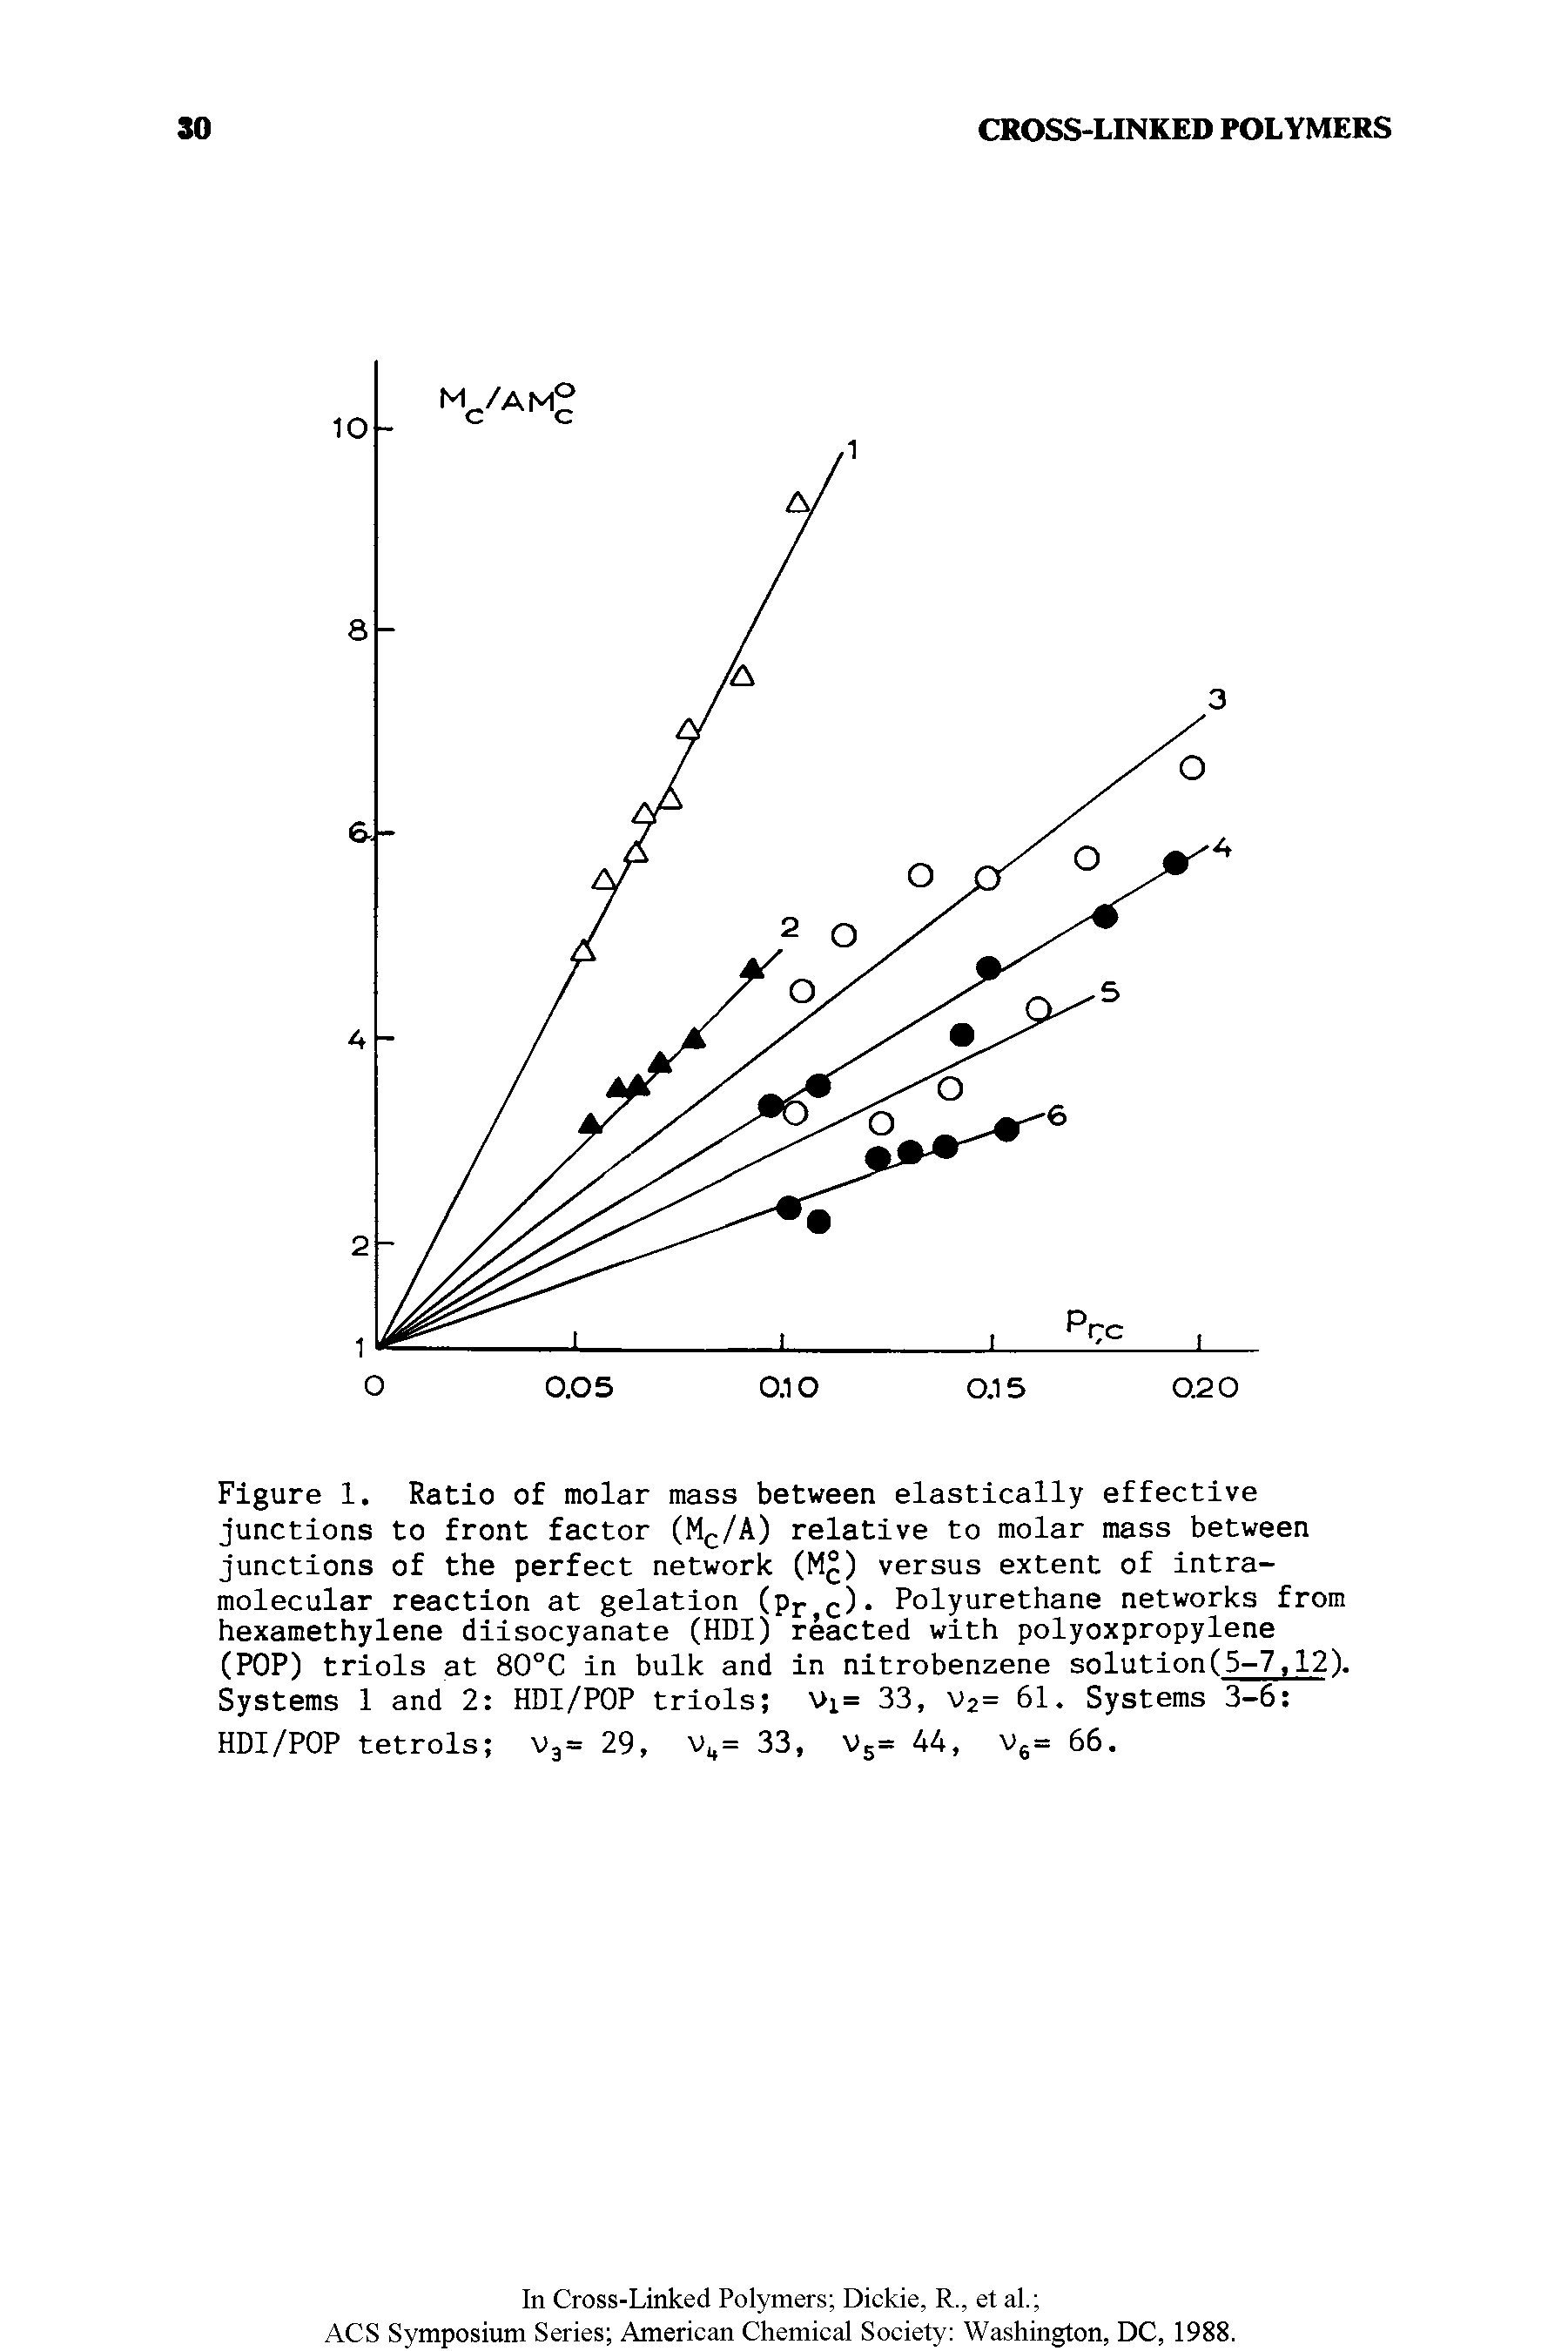 Figure 1, Ratio of molar mass between elastically effective junctions to front factor (M(-/A) relative to molar mass between junctions of the perfect network (M ) versus extent of intramolecular reaction at gelation (pj- (.) Polyurethane networks from hexamethylene diisocyanate (HDI) reacted with polyoxpropylene (POP) triols at 80°C in bulk and in nitrobenzene solution(5-7,12). Systems 1 and 2 HDI/POP triols >i= 33, V2= 61. Systems 3-6 ...